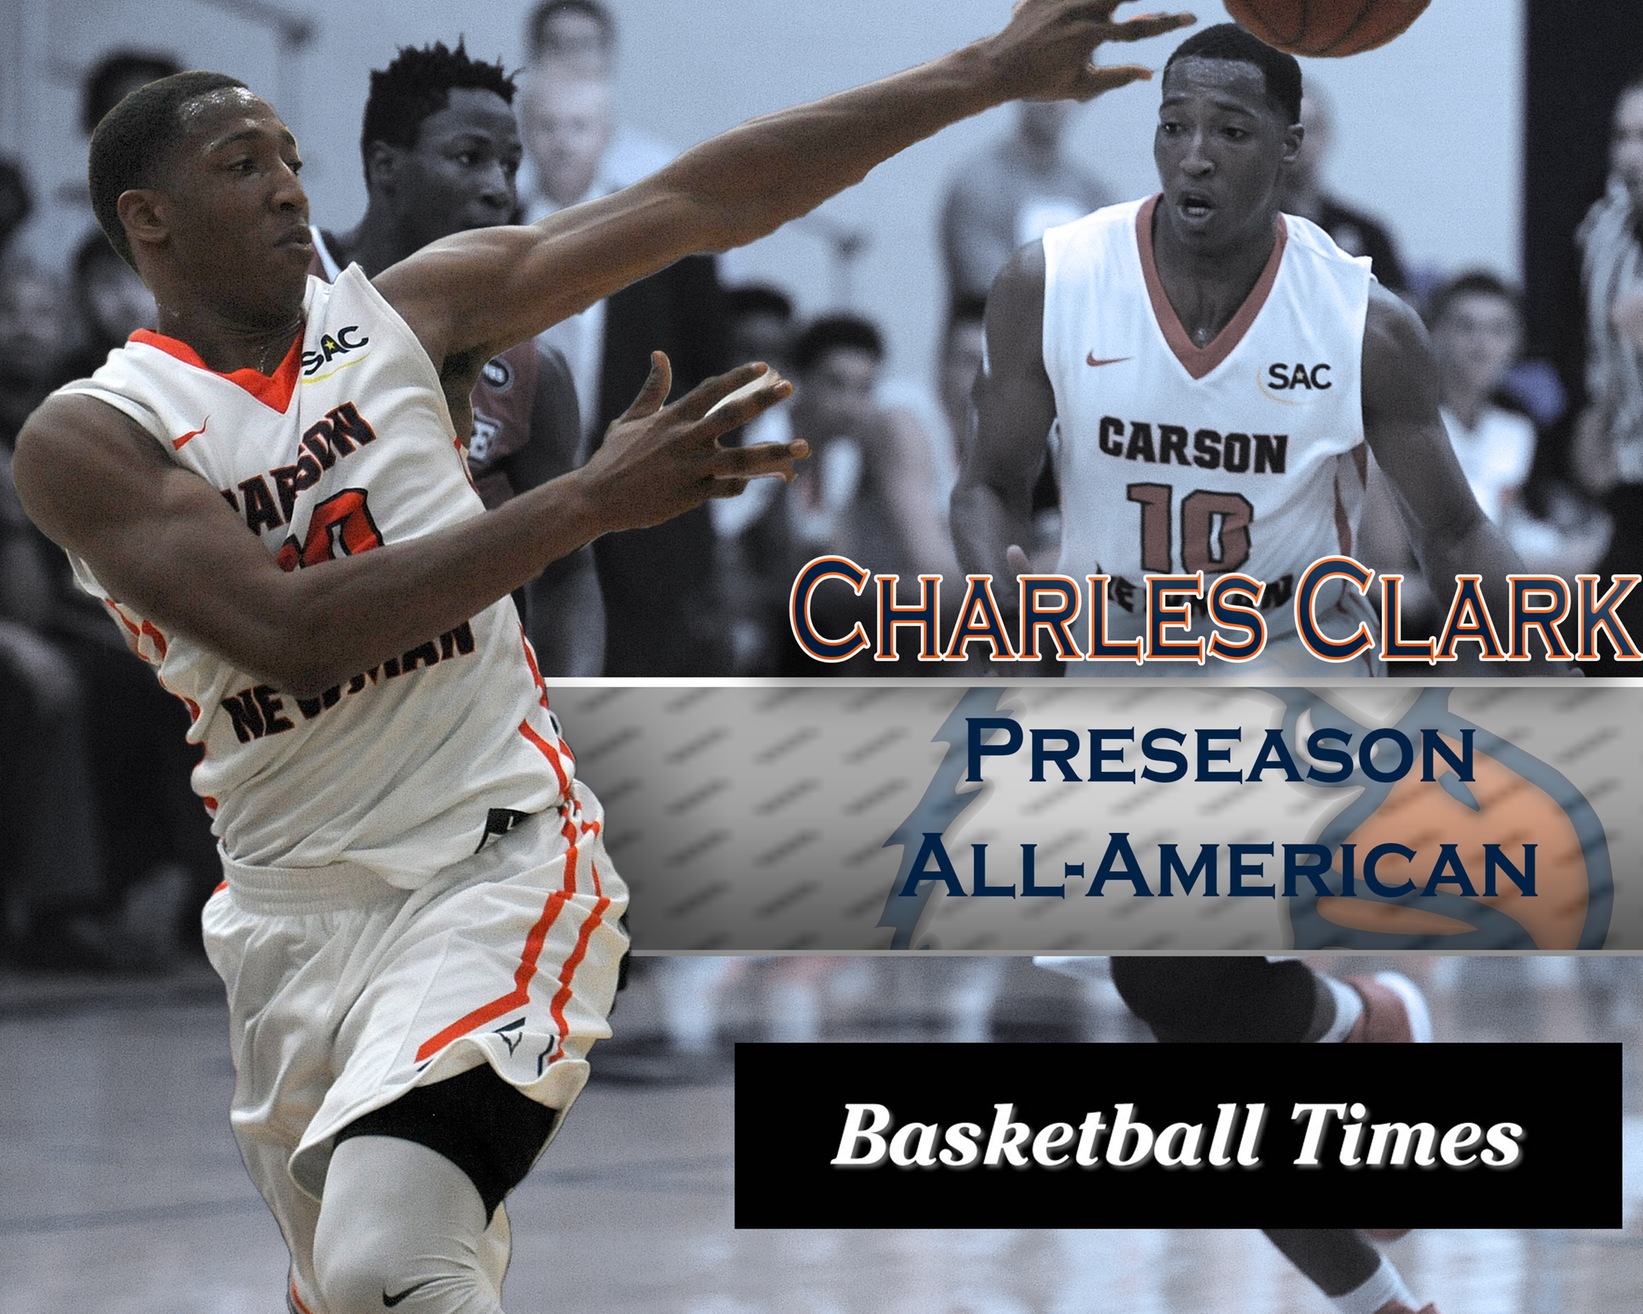 Basketball Times lauds Clark with preseason All-America honors